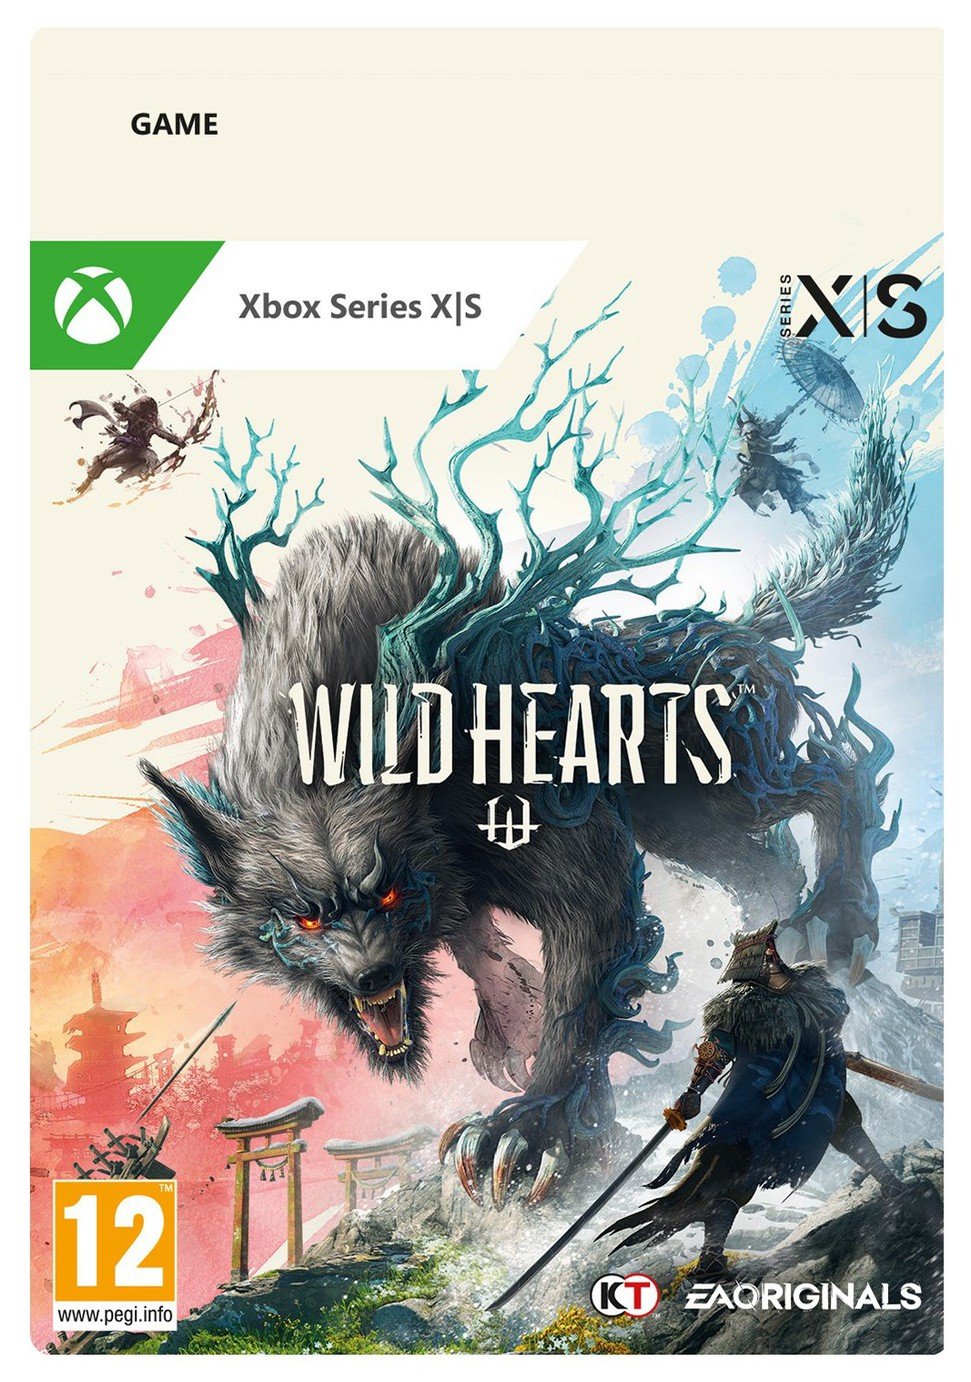 WILD HEARTS Standard Edition Xbox Series X/S Game